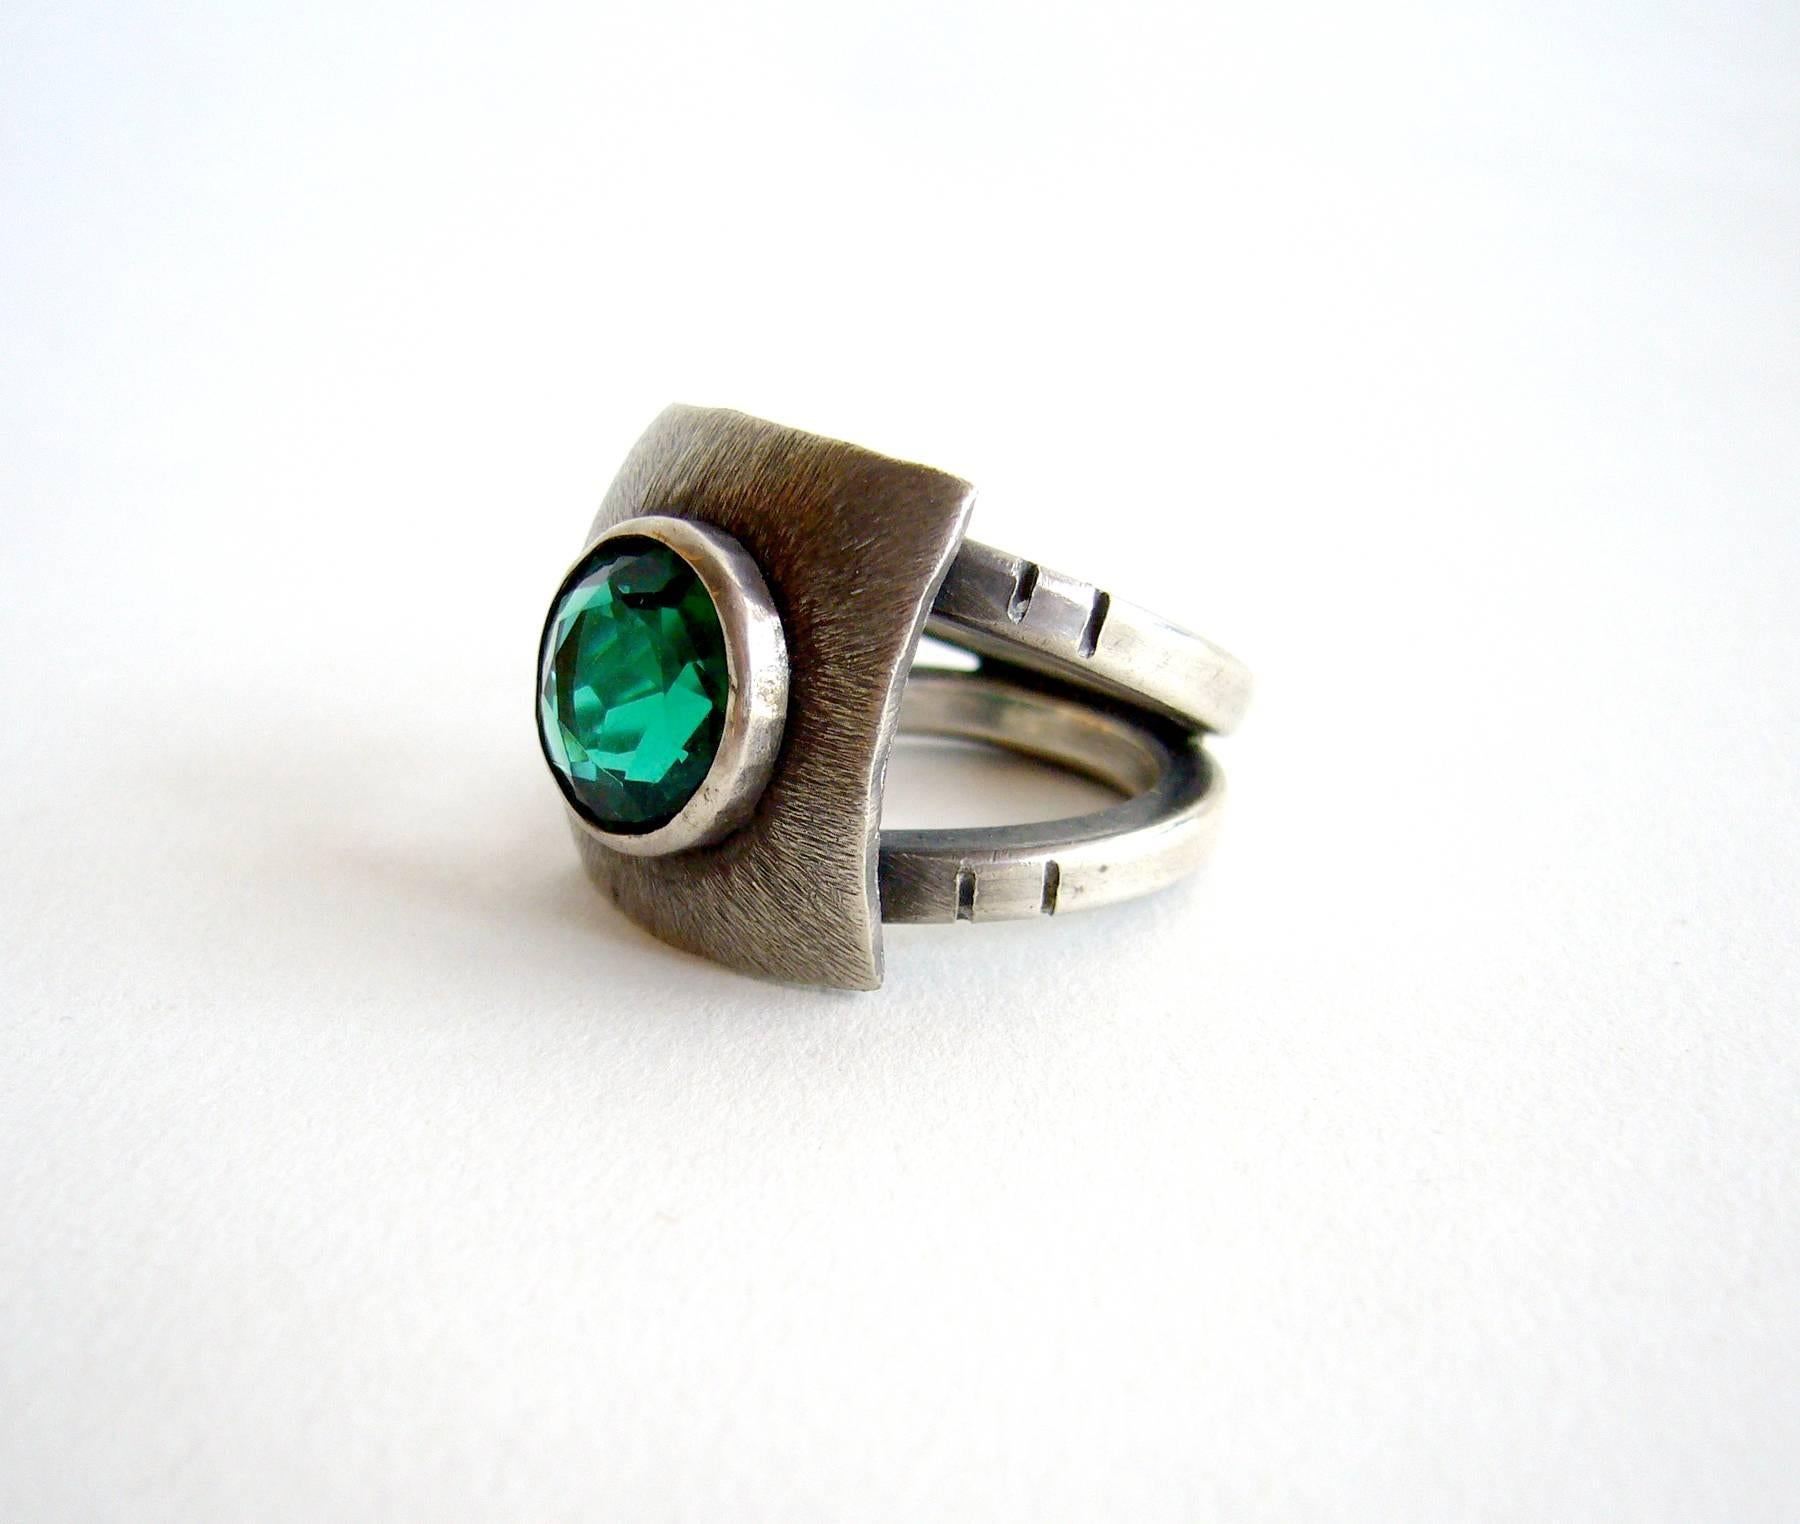 Hand textured sterling silver ring with faceted emerald color quartz created by silversmith James Parker of San Diego, California.  Parker was an early member of the Allied Craftsmen of San Diego which started in the 1940's.  His jewelry was